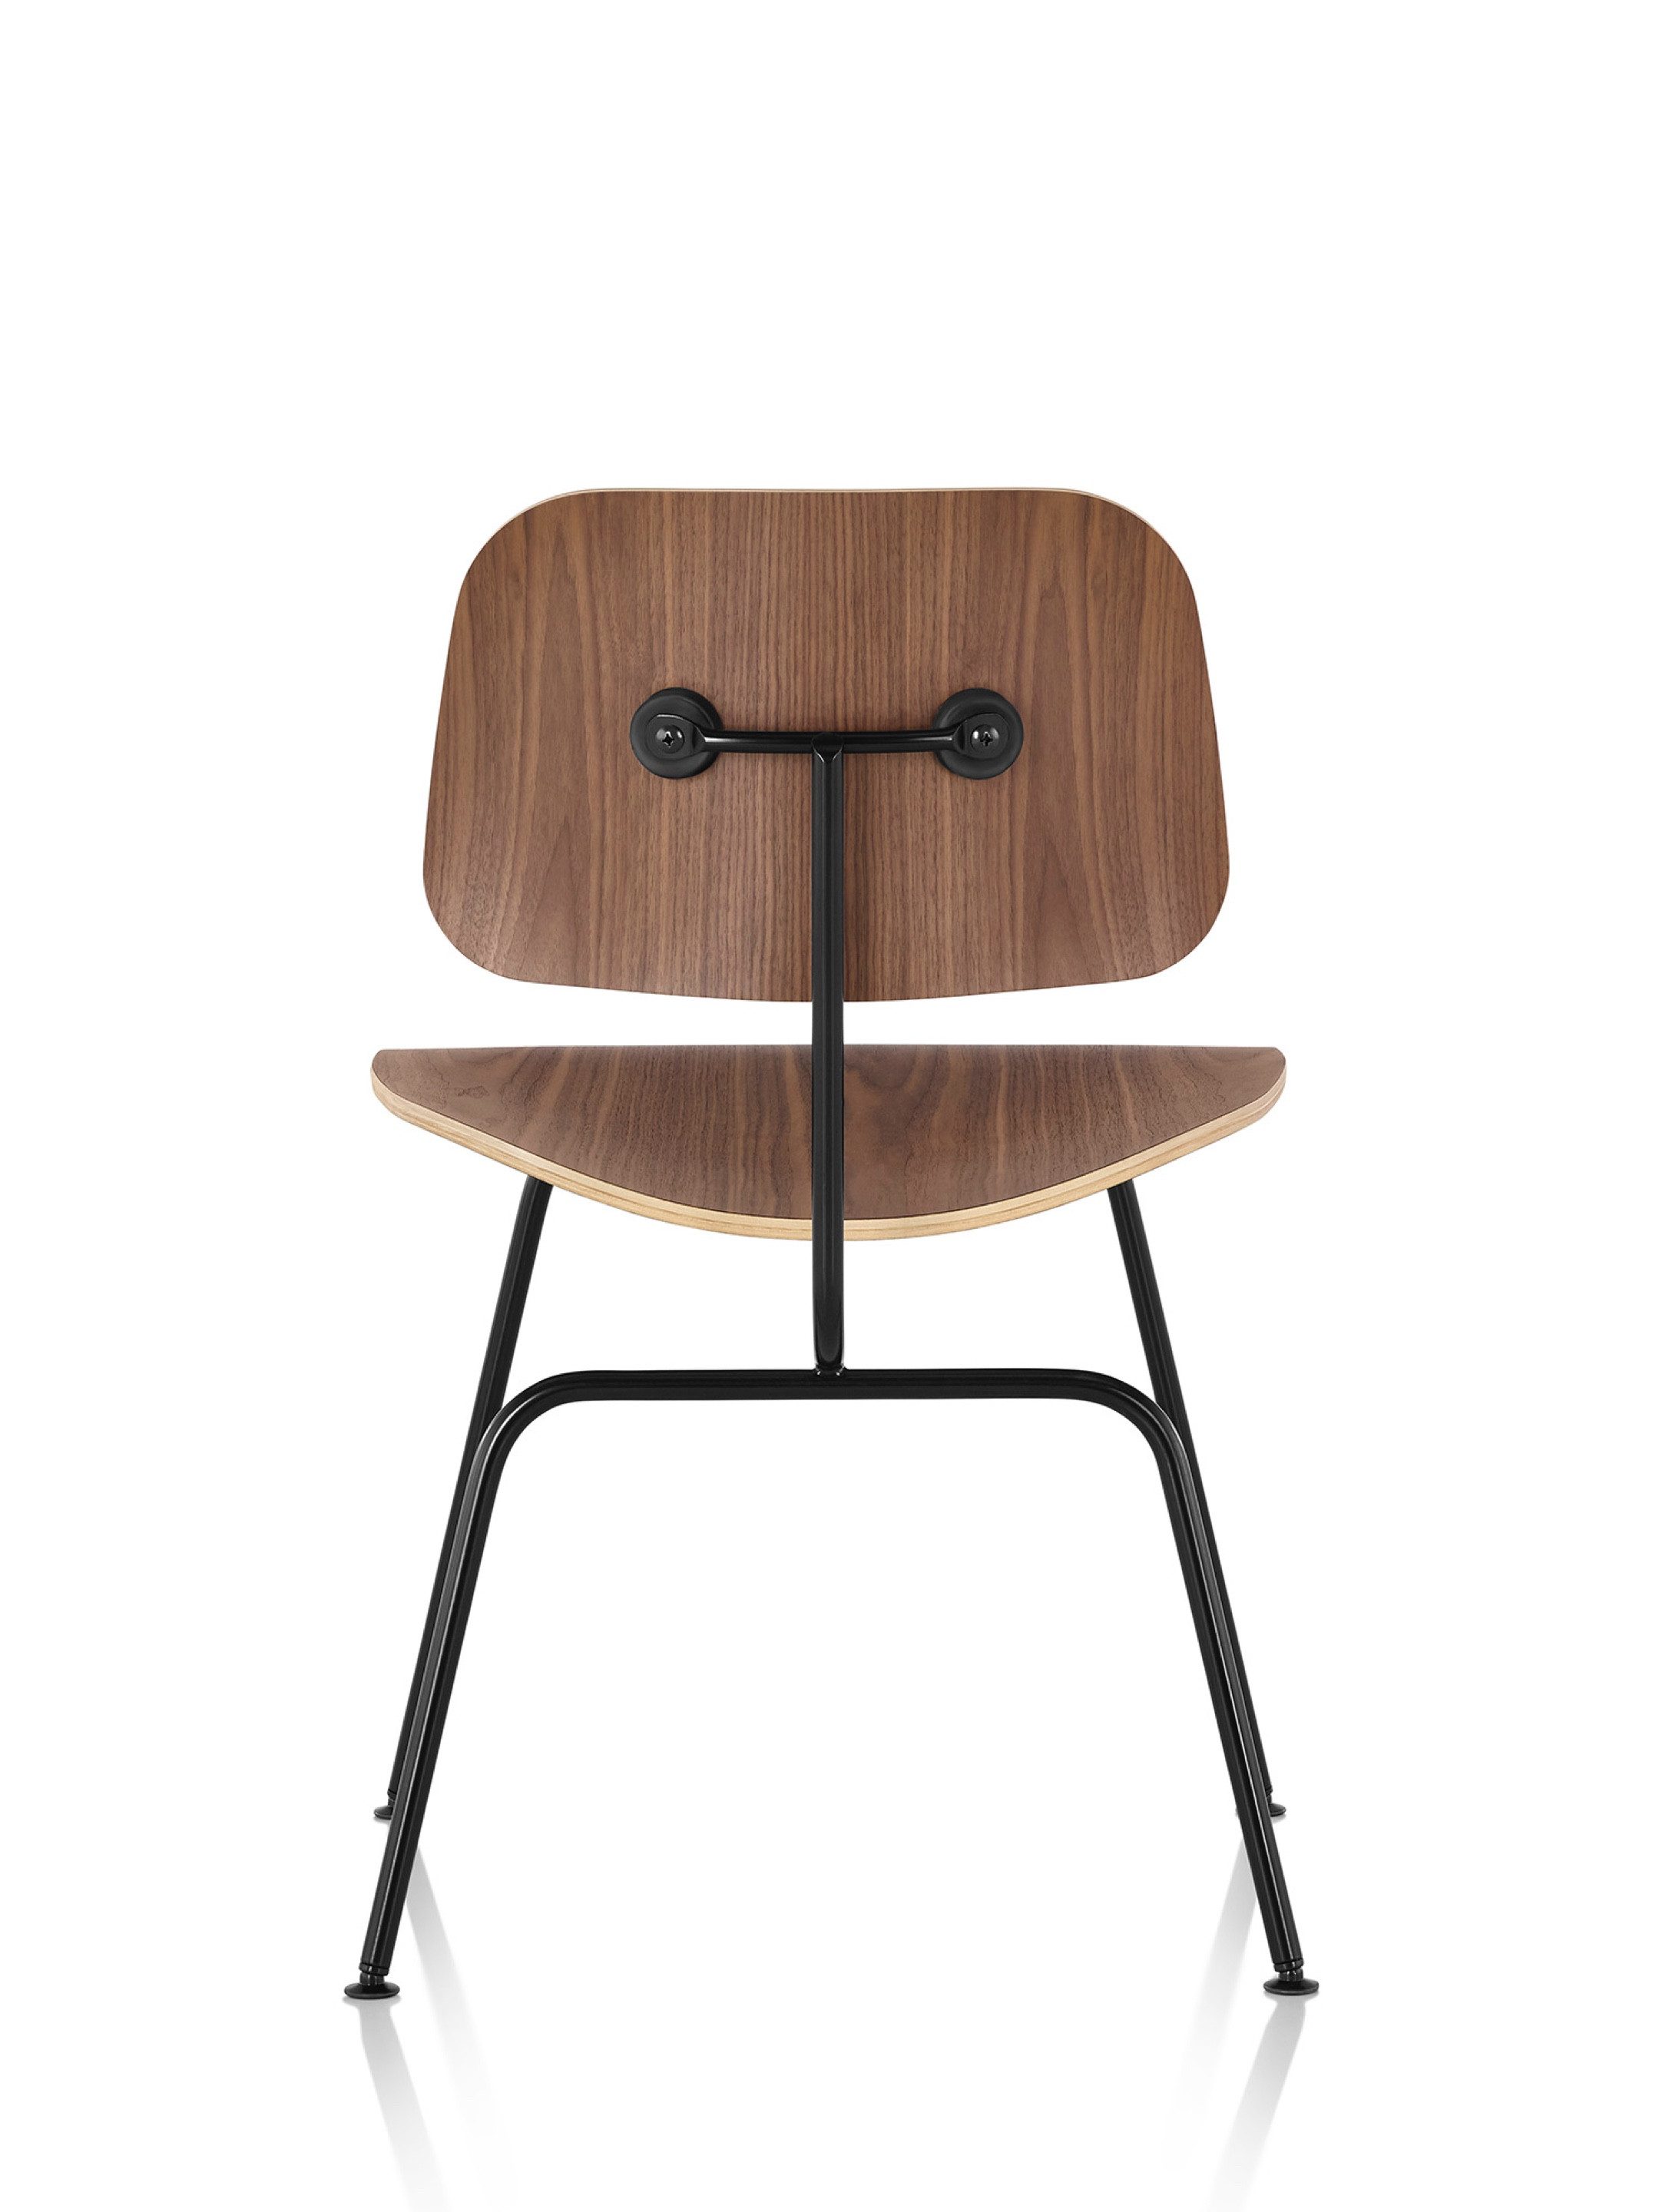 Best ideas about Eames Dining Chair
. Save or Pin Eames Molded Plywood Dining Chair with Metal Base Herman Now.